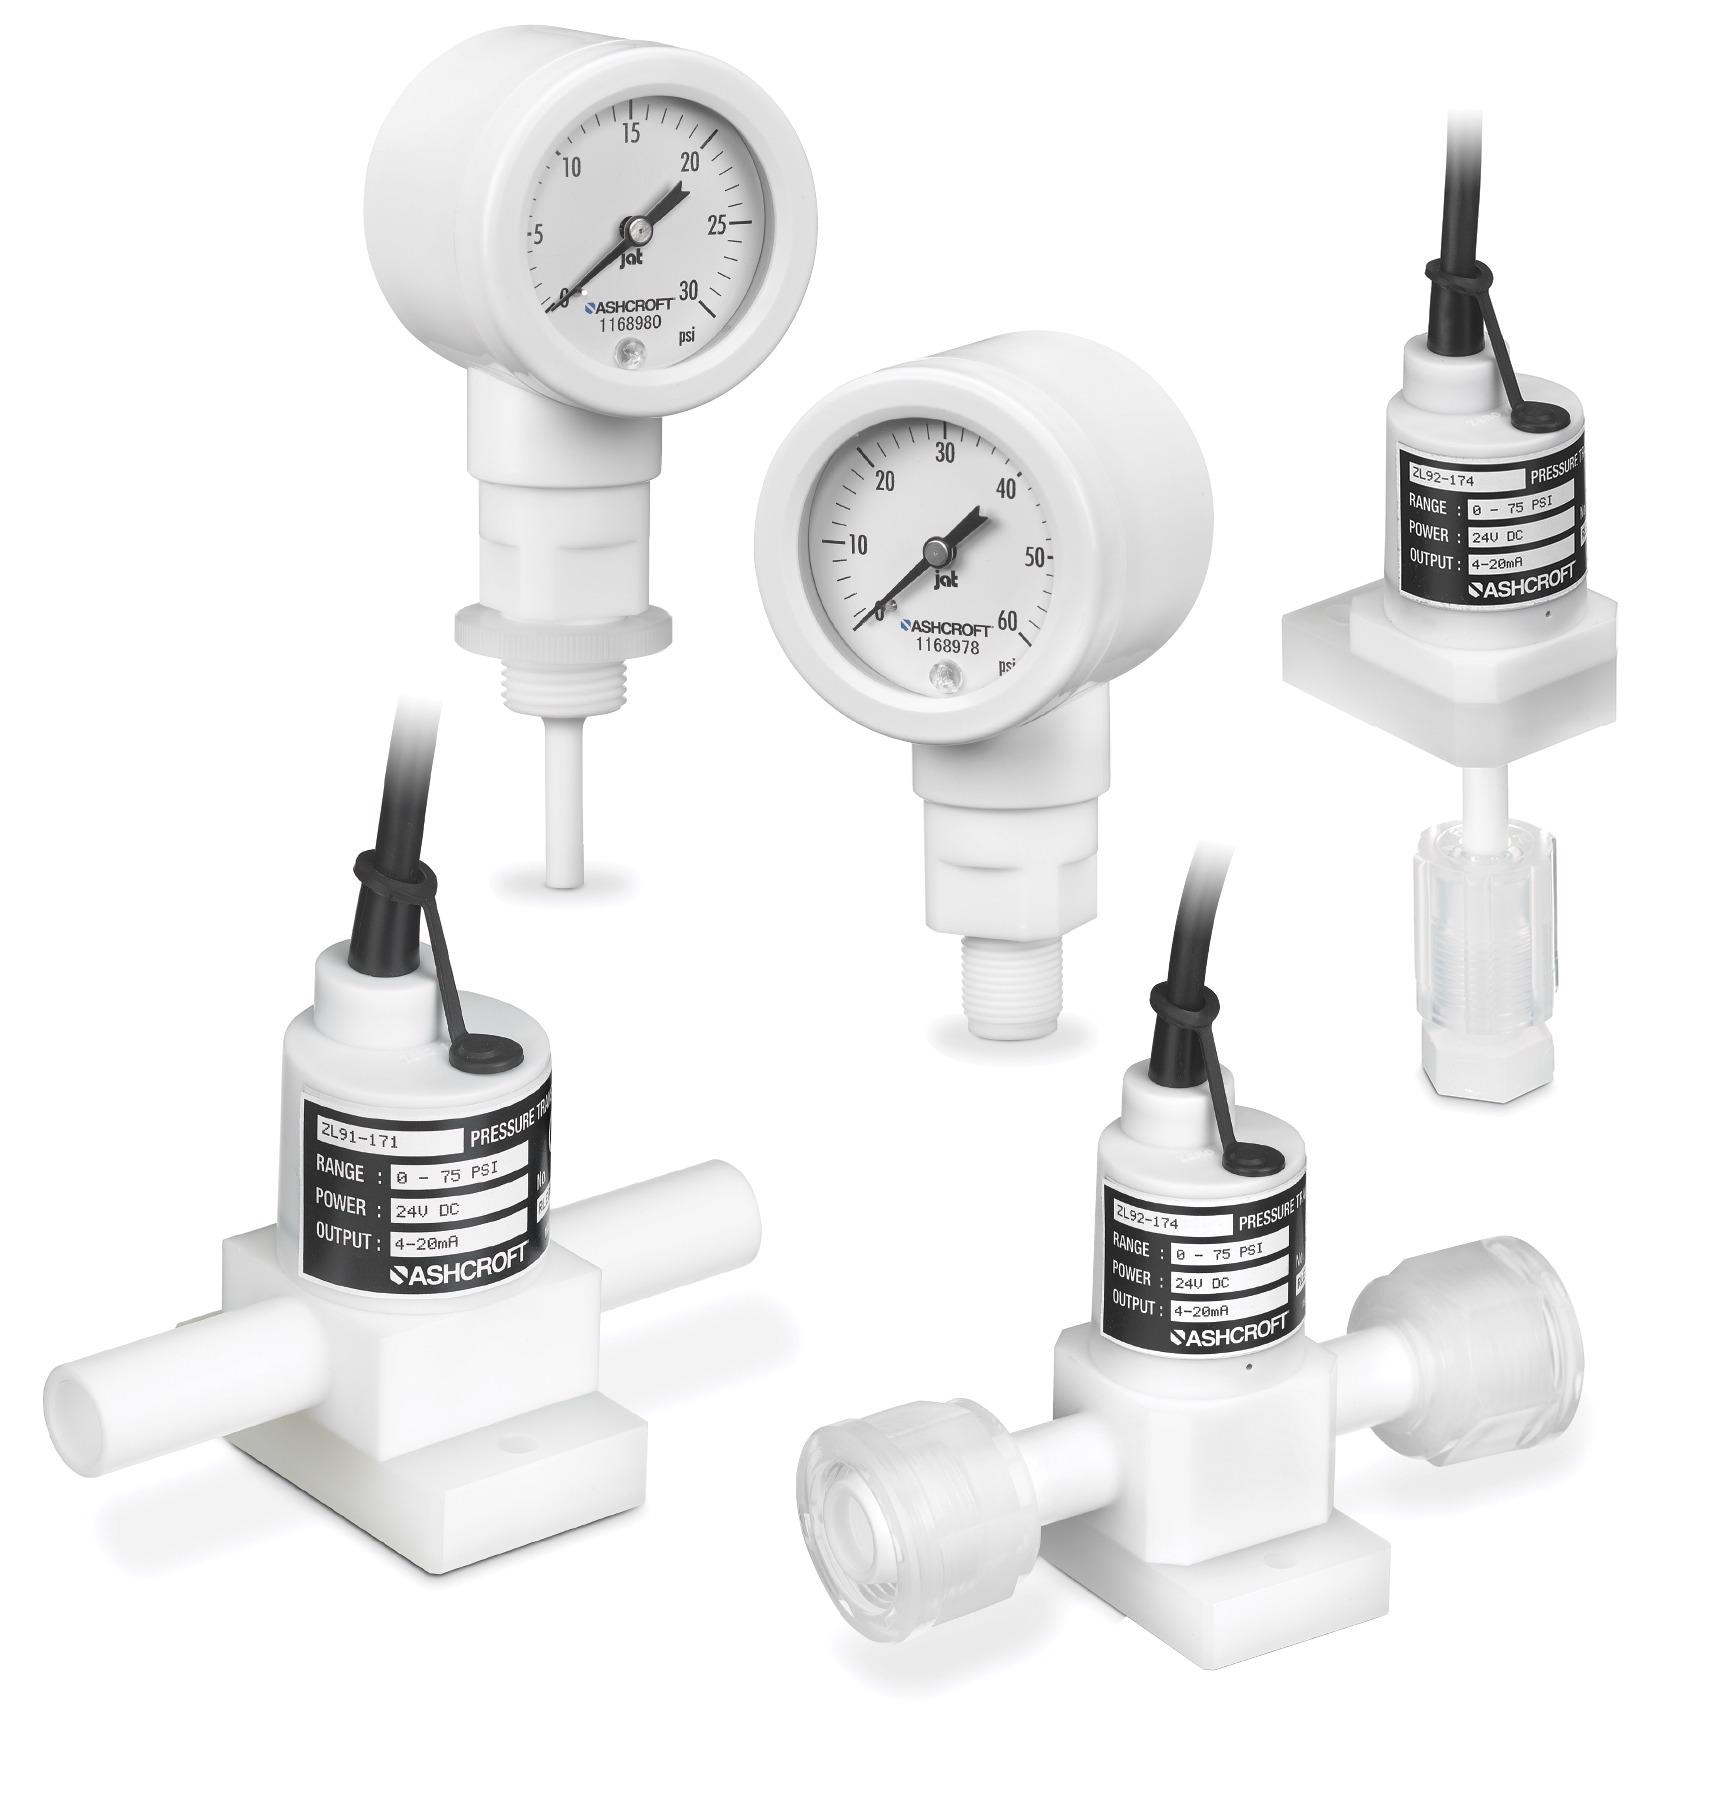 Pressure Transducers and Gauges for Semiconductor Applications